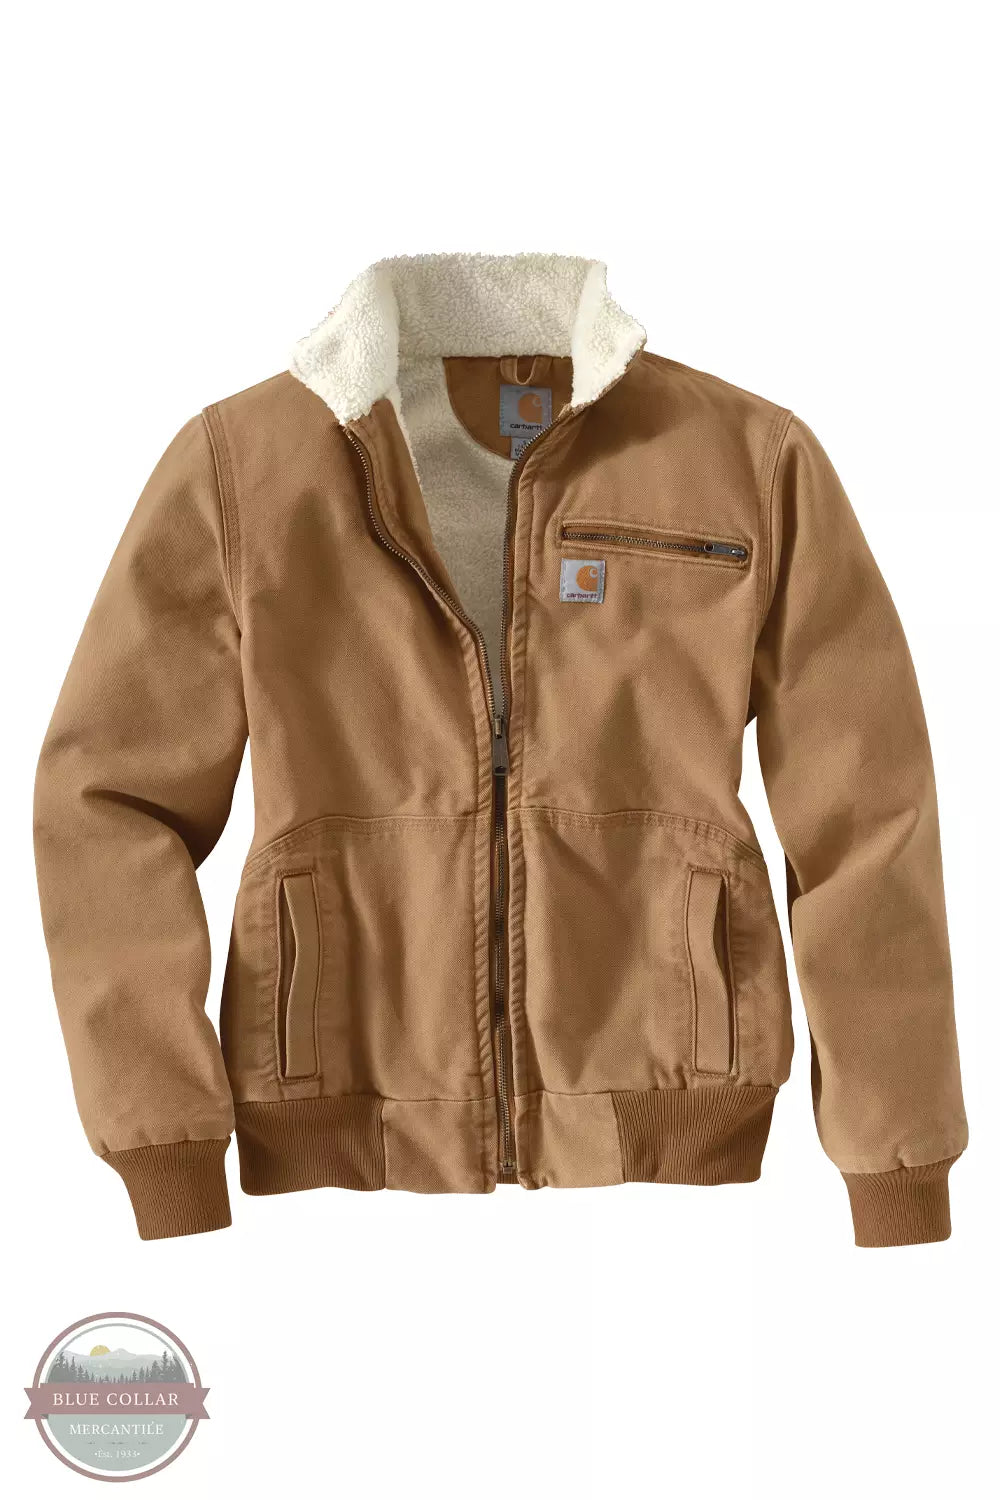 Carhartt 100815-211 Sherpa Lined Weathered Duck Jacket in Carhartt Brown Front View